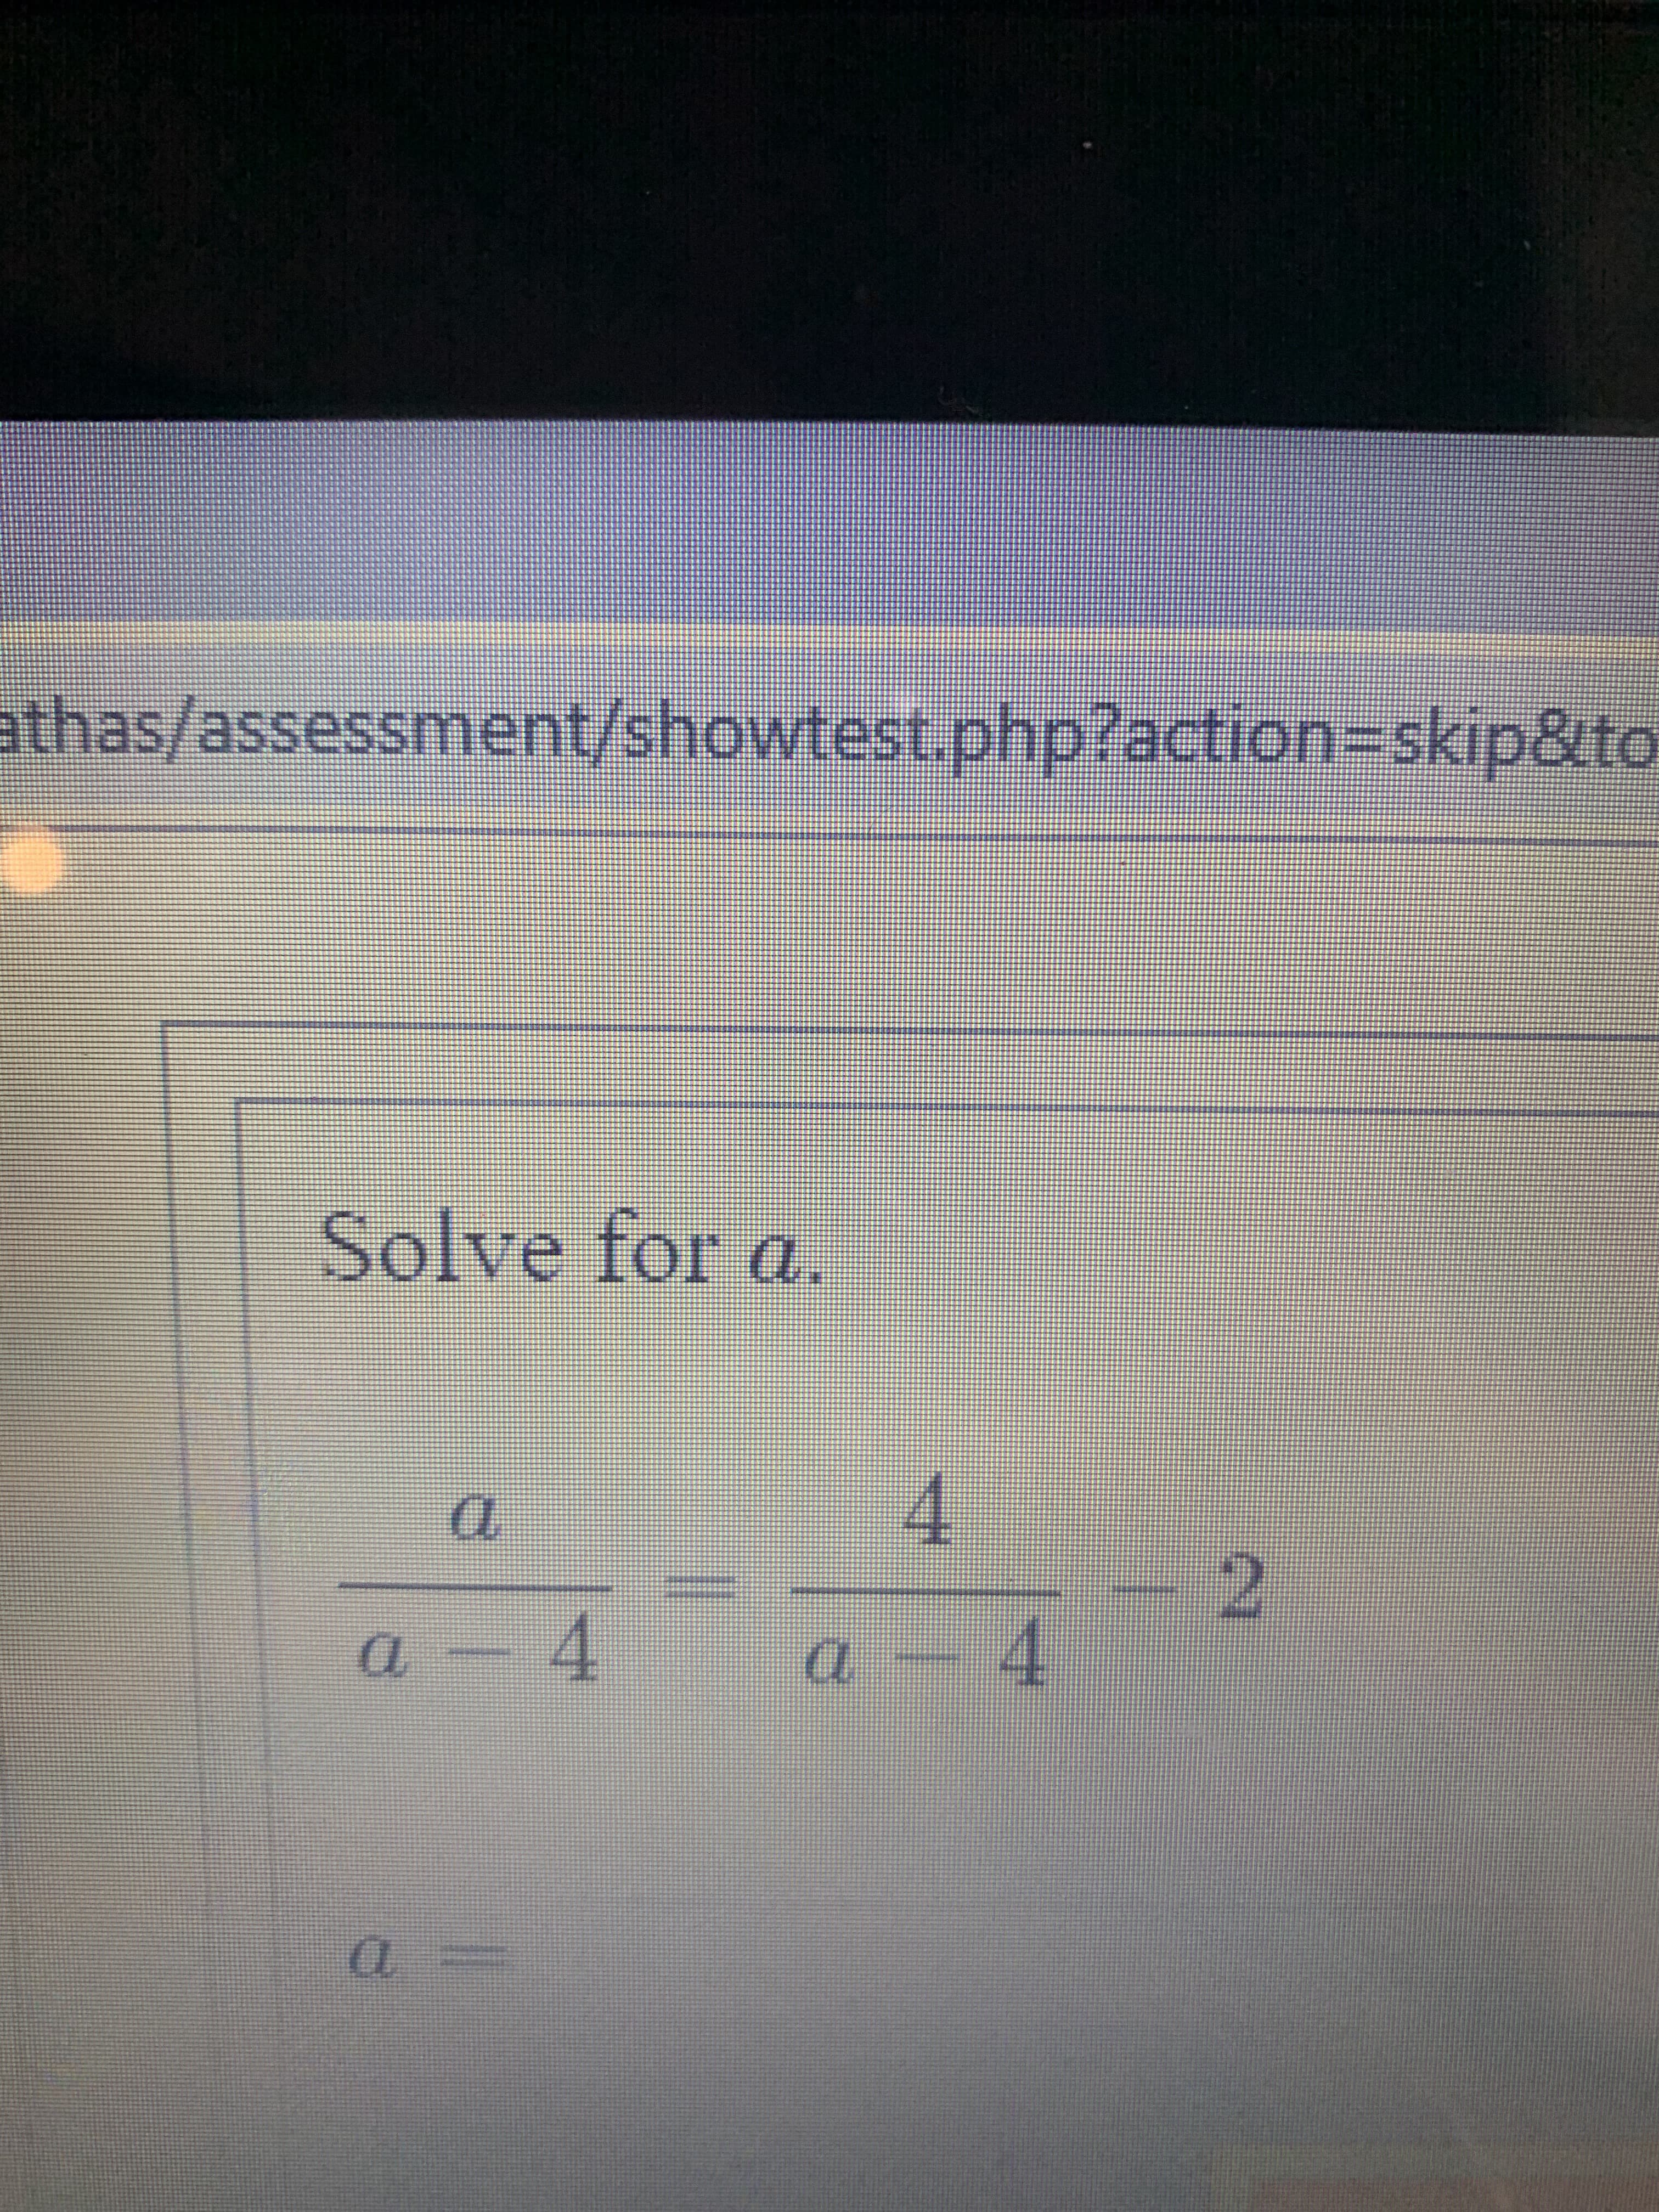 athas/assessment/showtest.php?action-skip8to
Solve for a.
4
2
4
4
st
